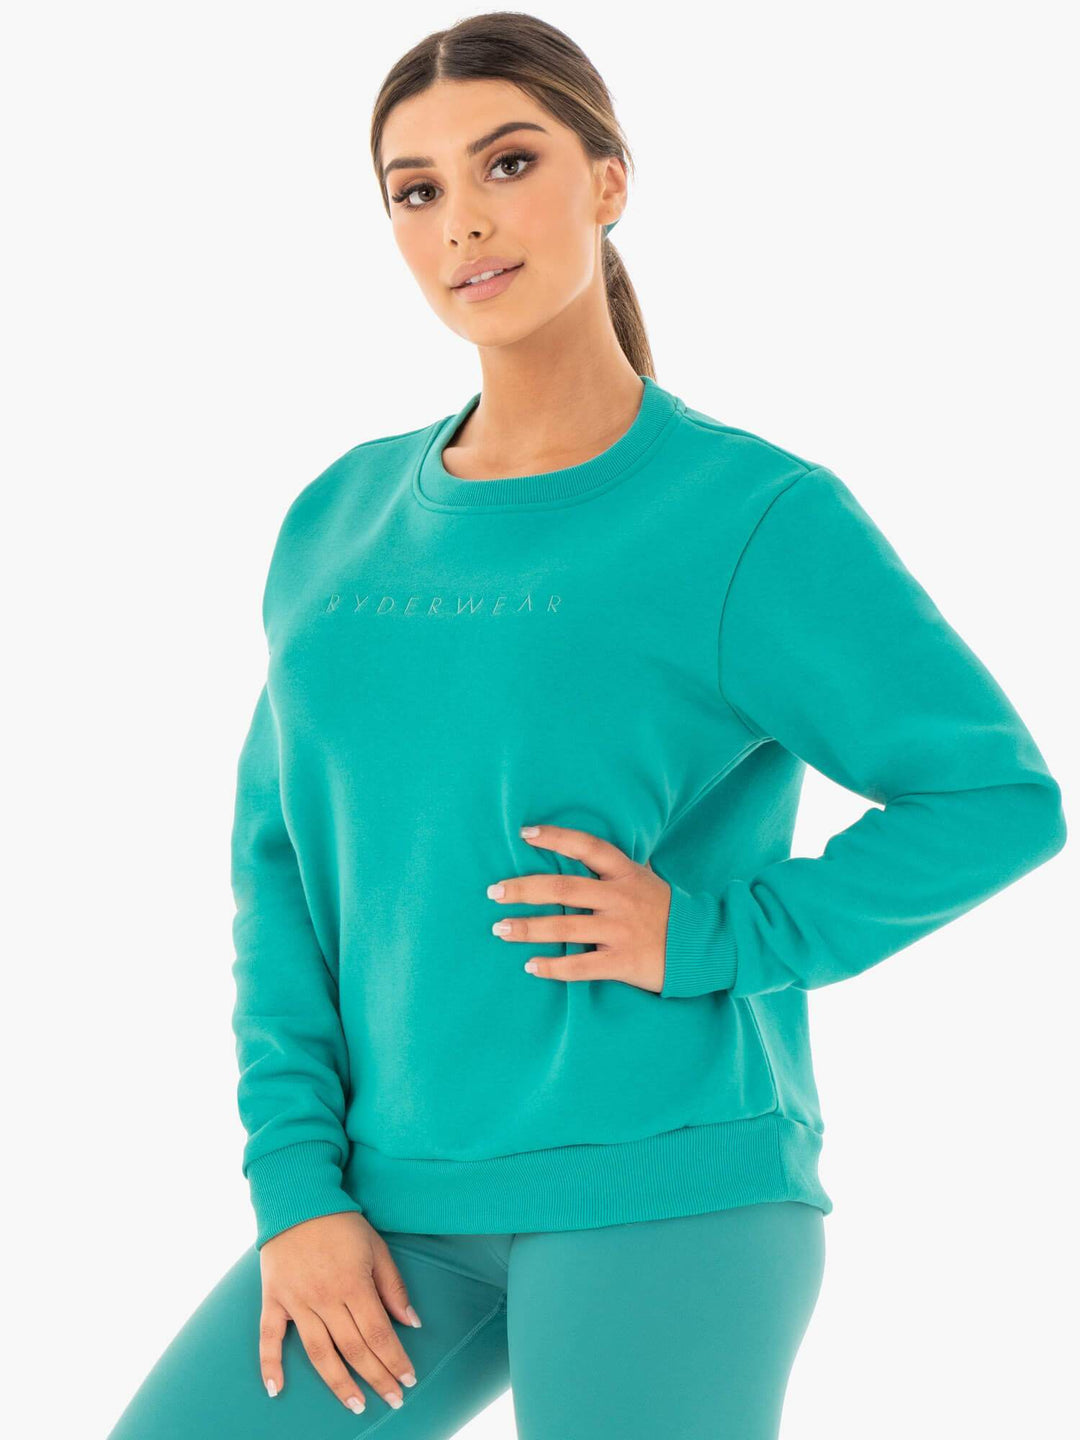 Motion Oversized Sweater - Teal Clothing Ryderwear 